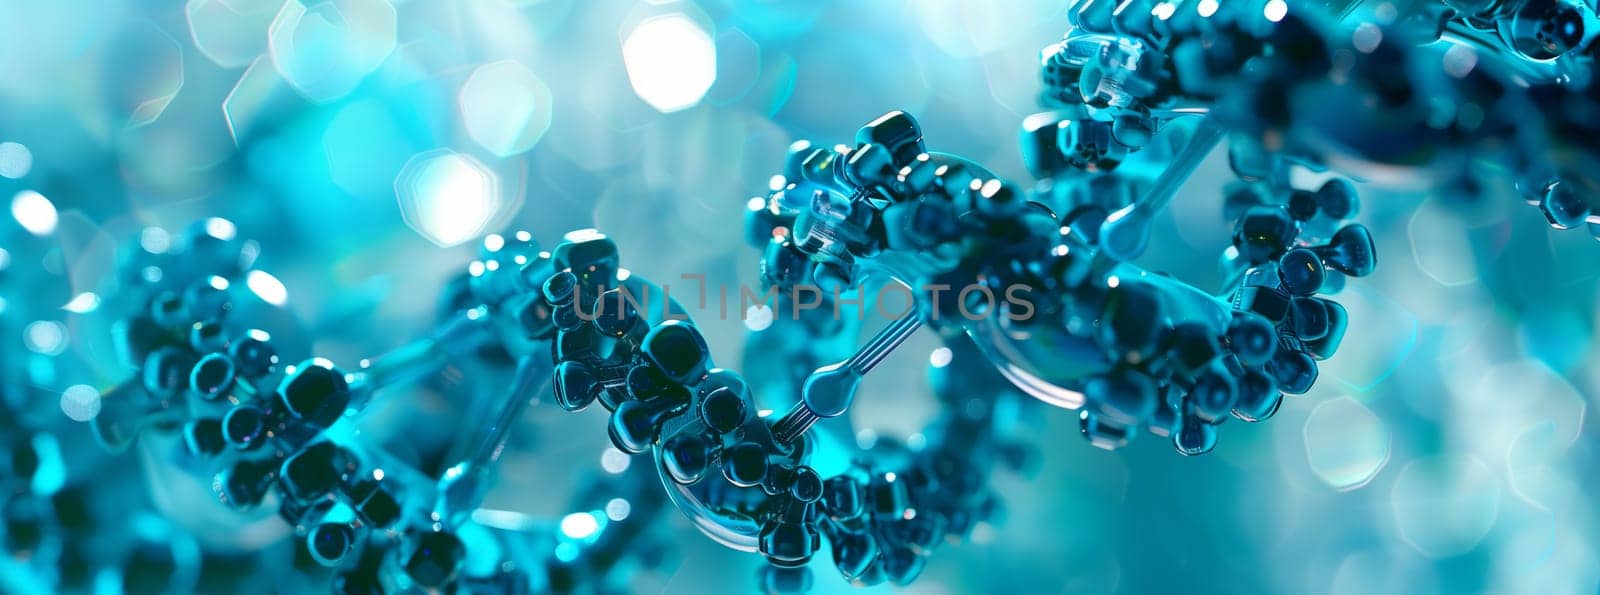 Macro photography of an electric blue necklace with rhinestones on a blue background resembling water or liquid. The pattern is intricate, evoking a plantlike art piece